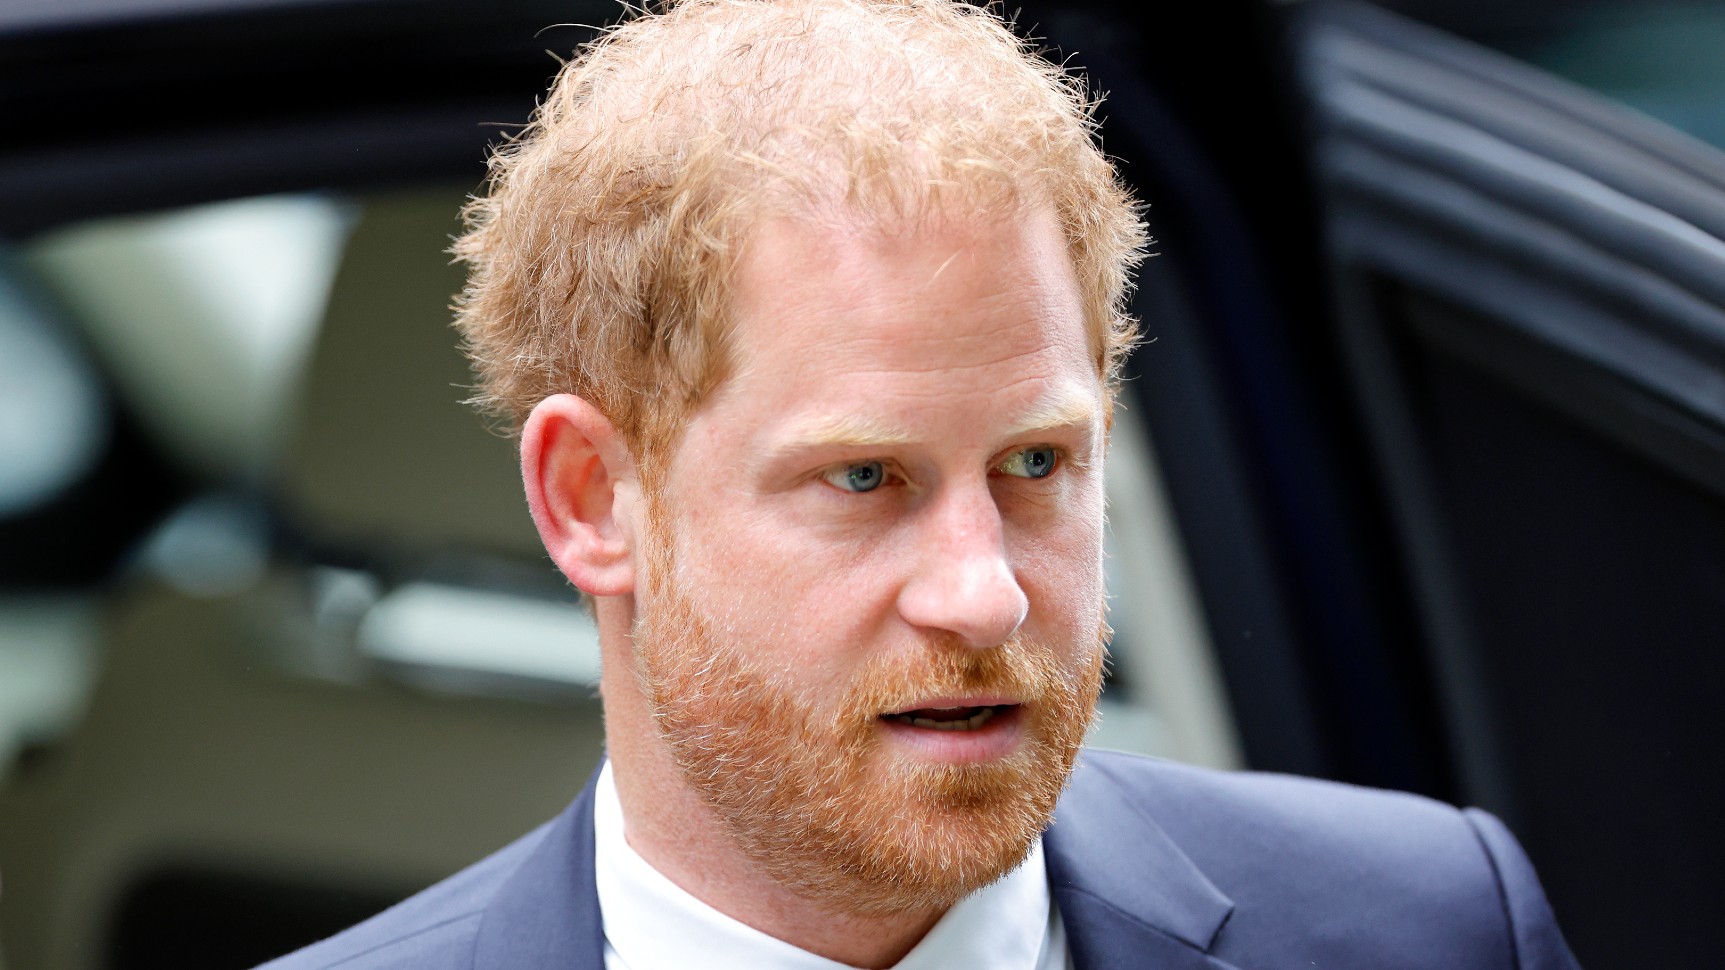 Prince Harry Speaks Out on James Hewitt Paternity Rumors, Says He Feared He’d Be “Ousted from the Royal Family”